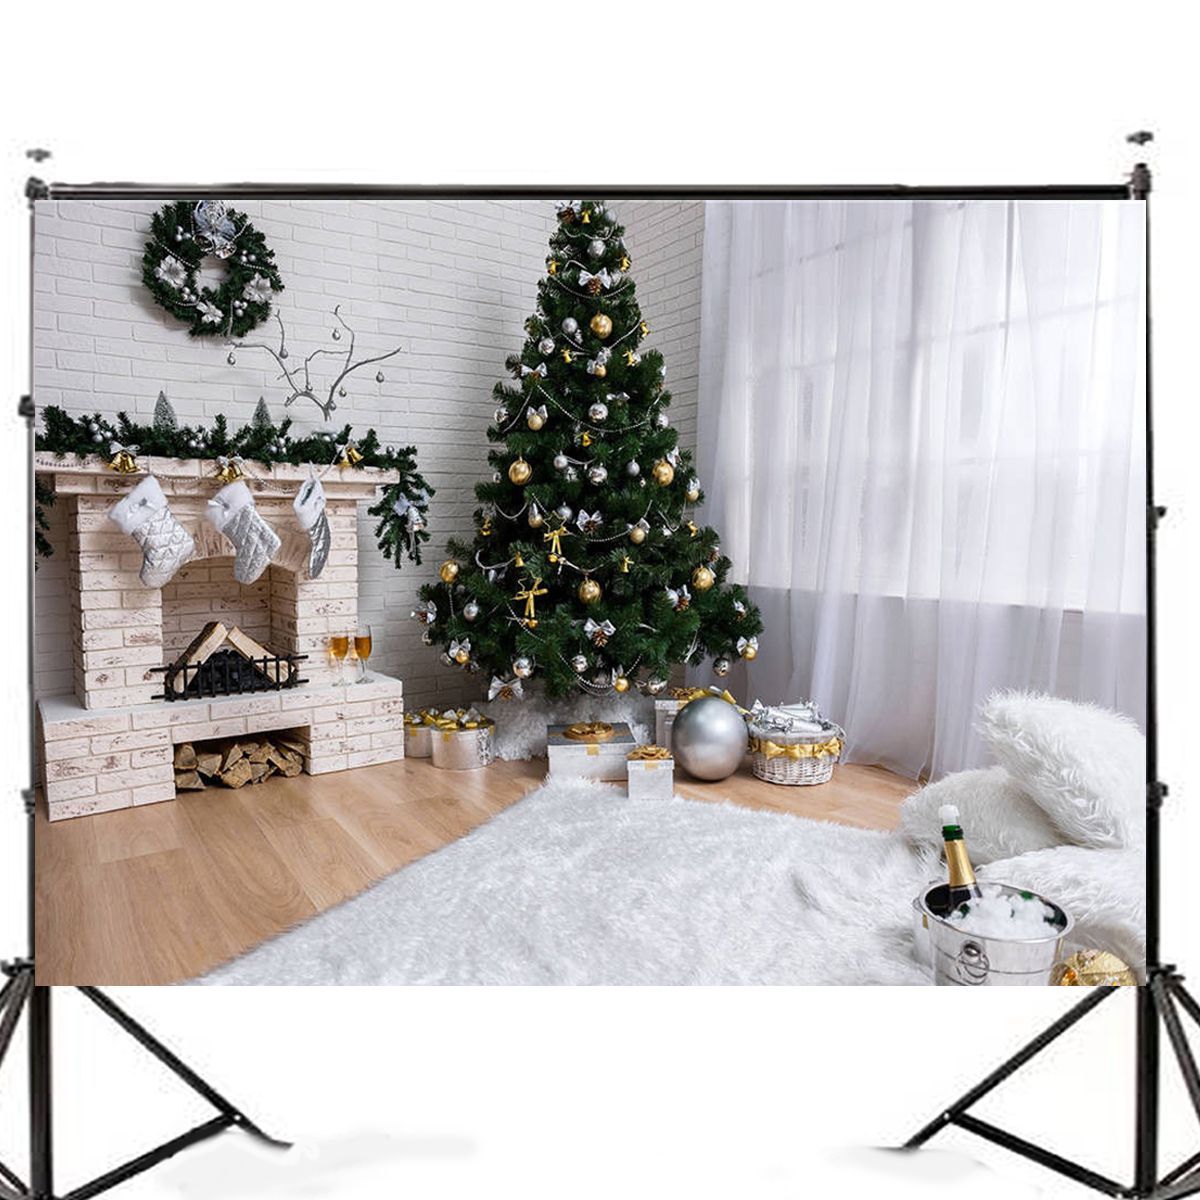 7x5FT-White-Room-Christmas-Tree-Fireplace-Theme-Photography-Backdrop-Studio-Prop-Background-1392171